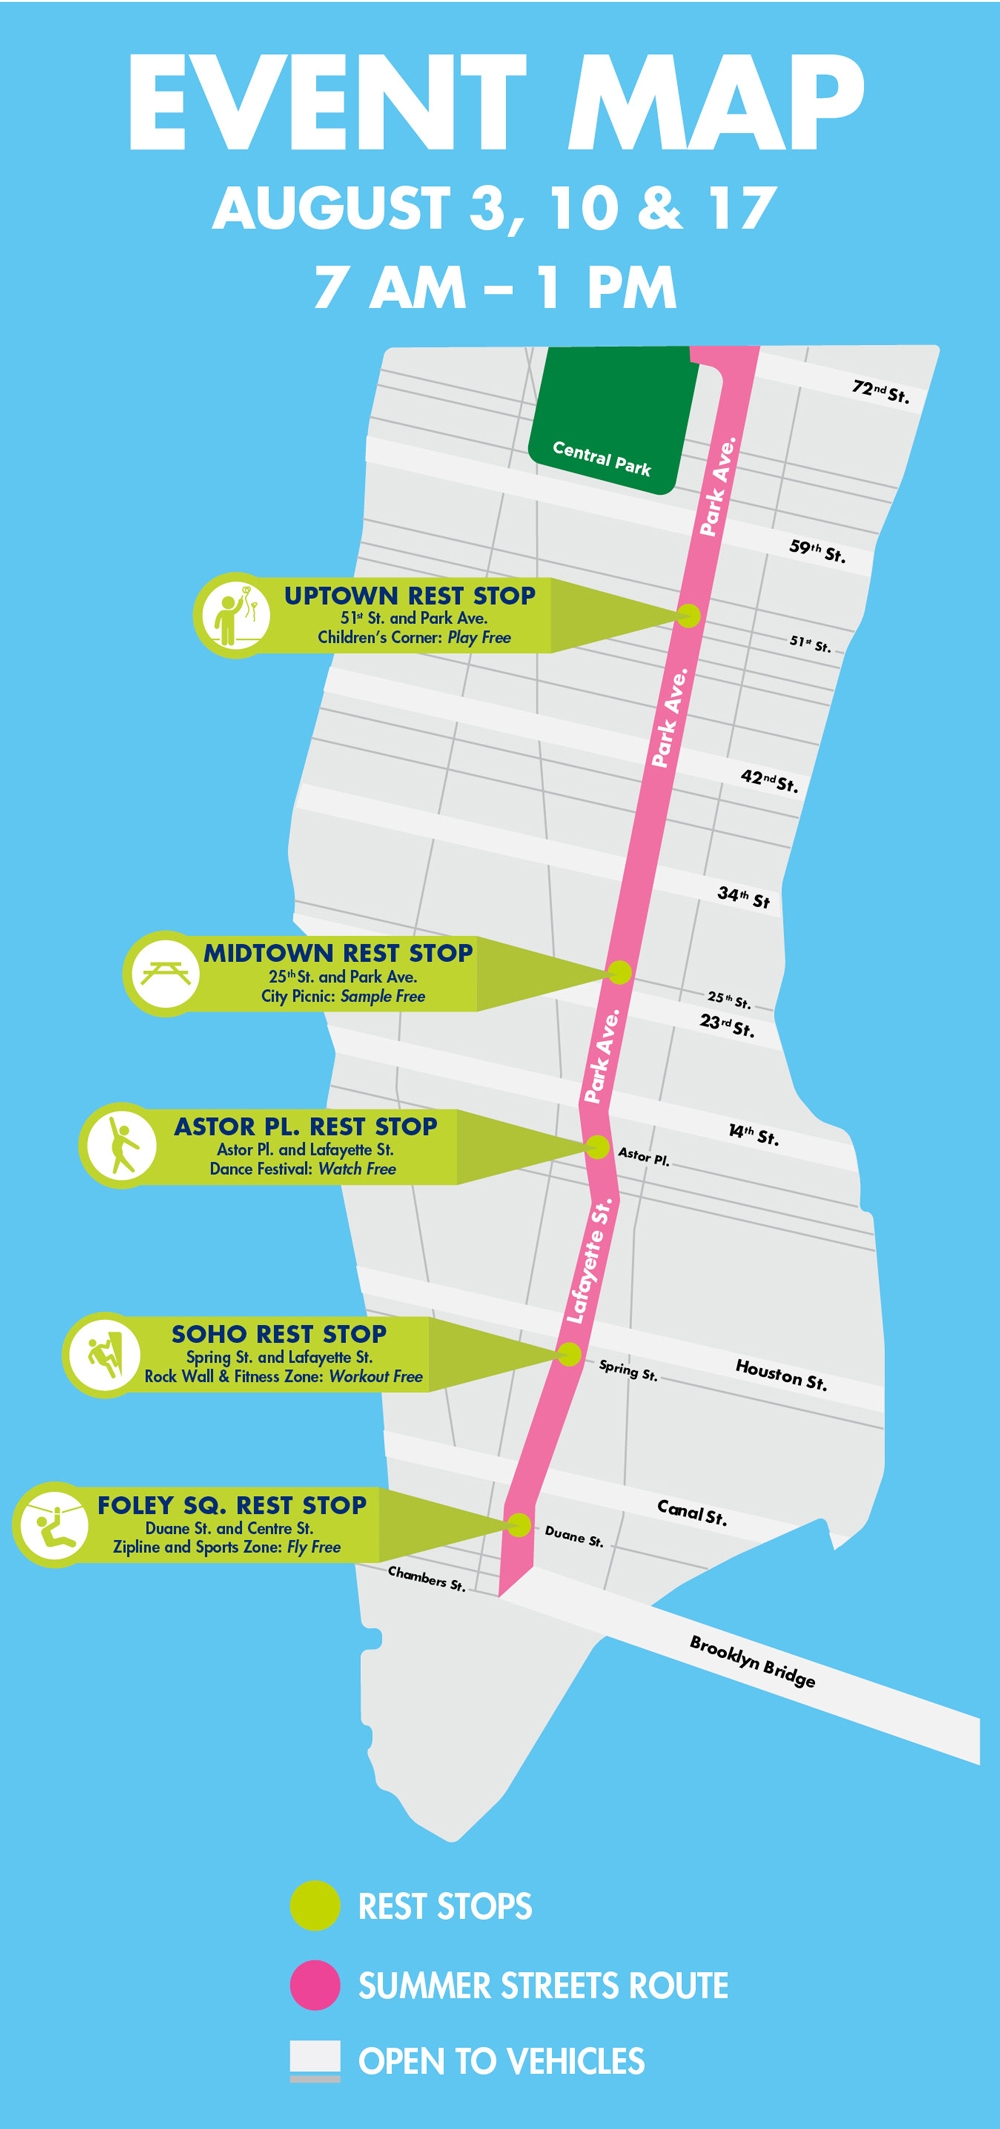 A map detailing all the rest stops for Summer Streets.